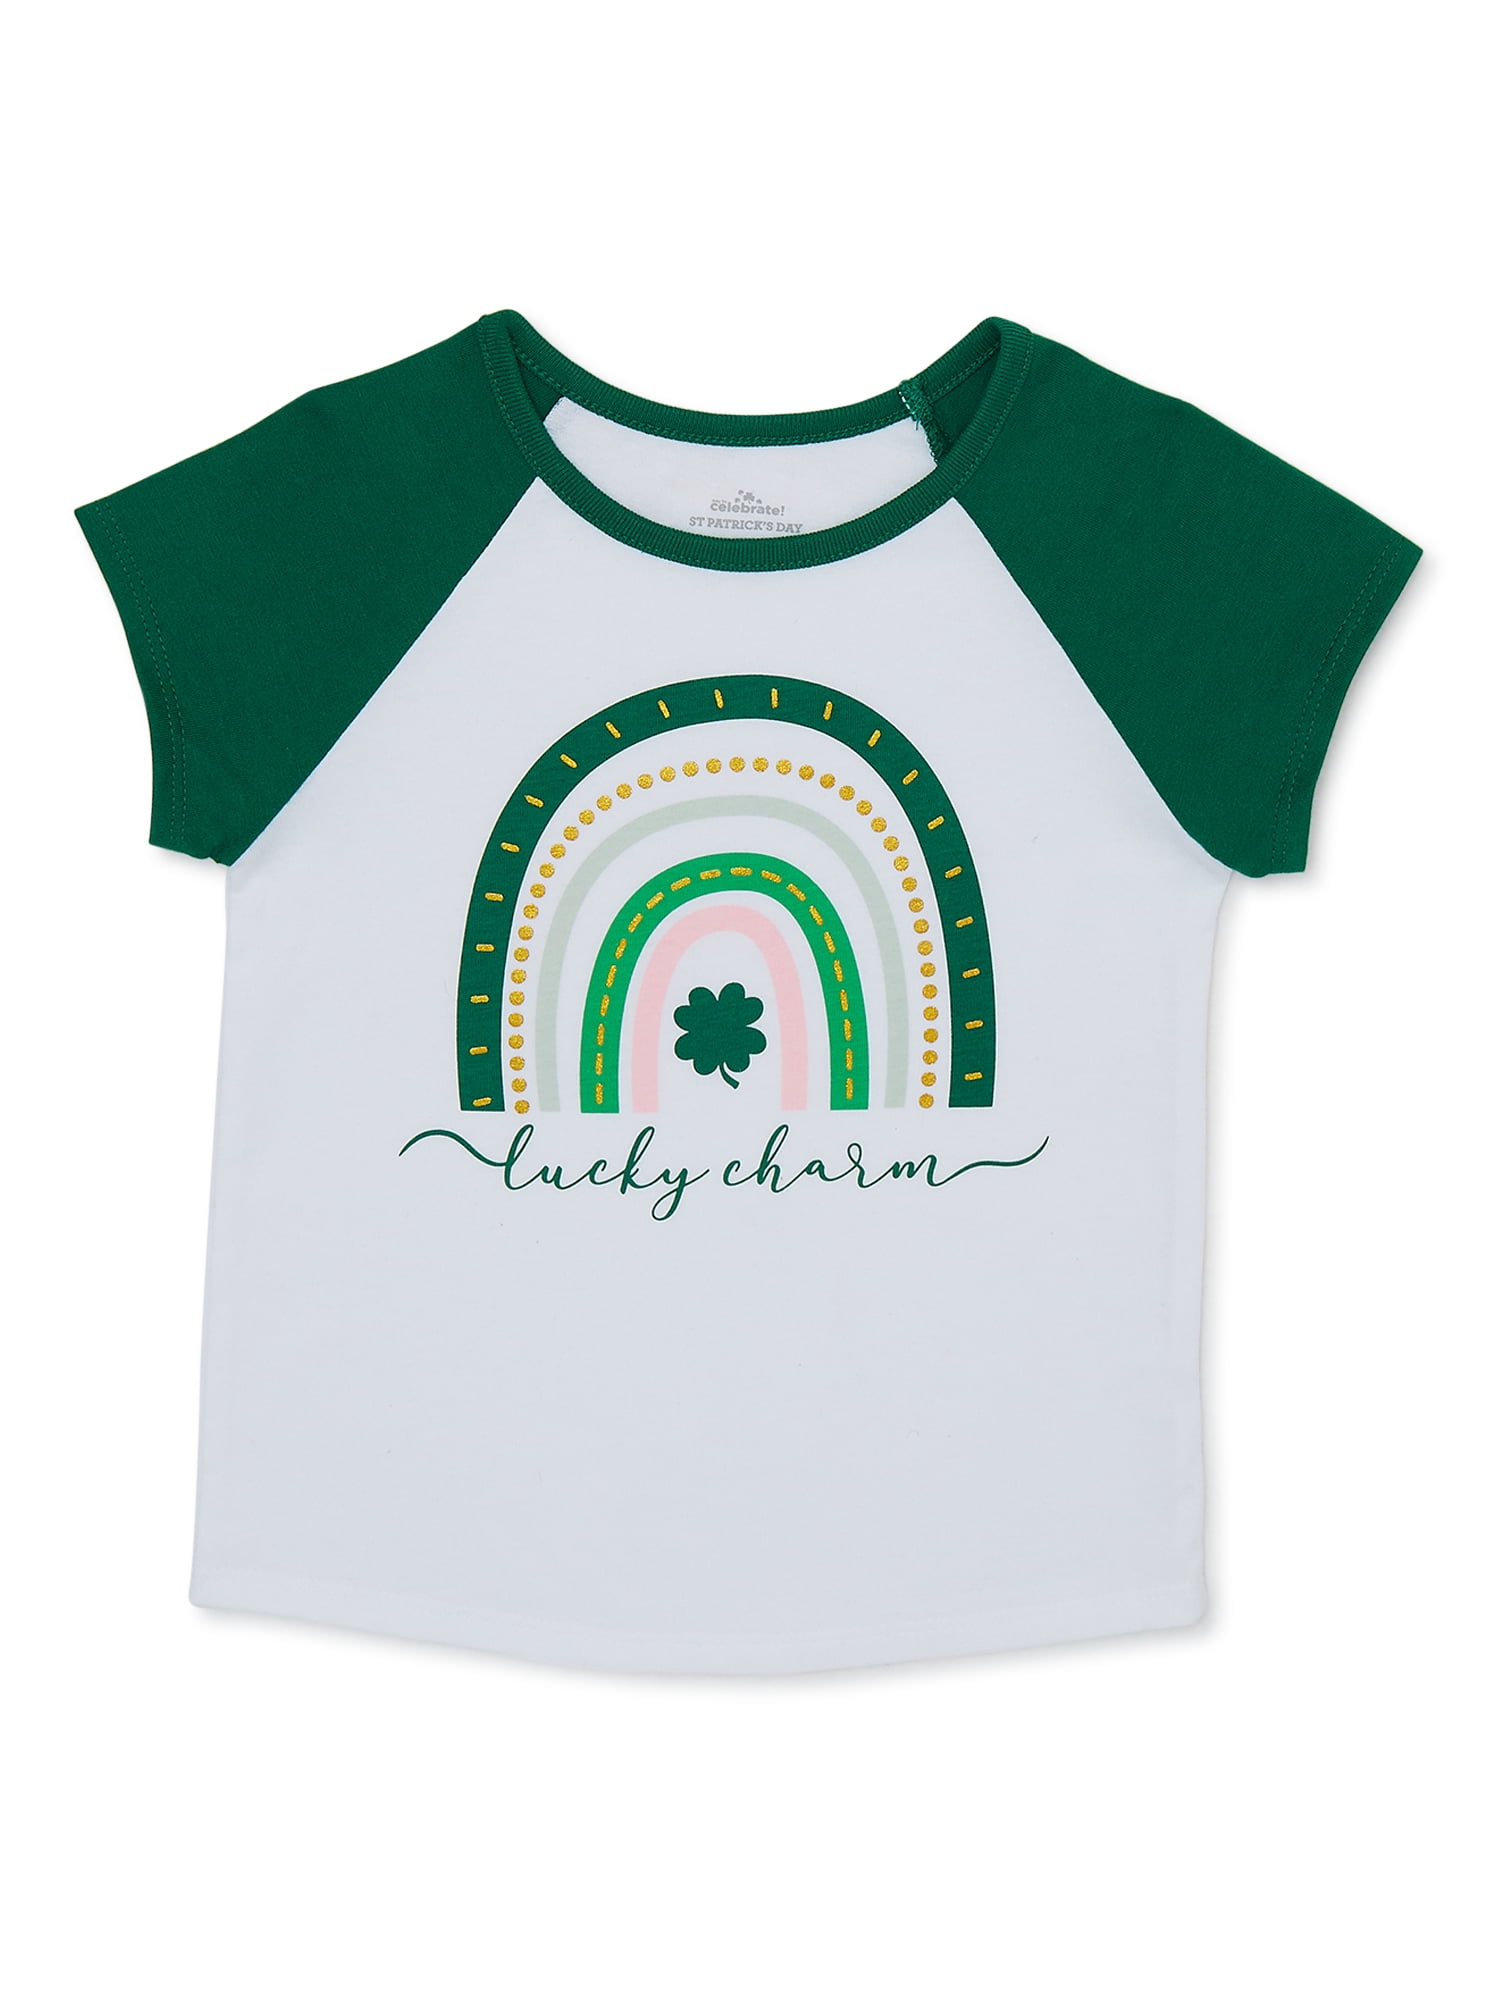 WAY TO CELEBRATE! St. Patrick's Day Baby and Toddler Girls Short Sleeve Graphic T-Shirt, Sizes 12 Months-5T